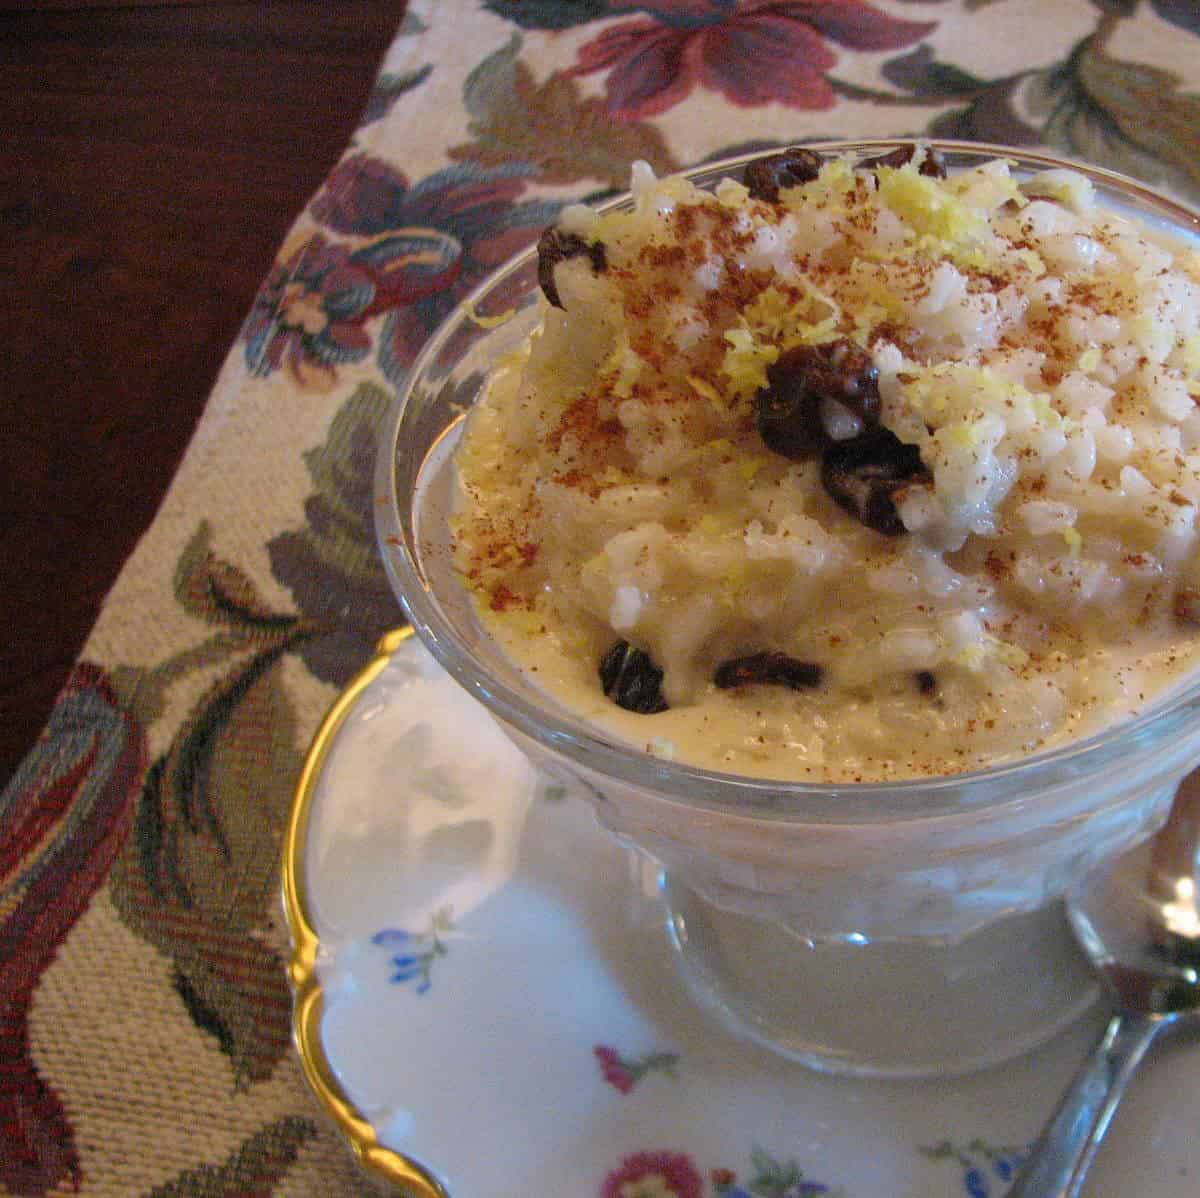  A warm bowl of rice pudding on a chilly evening is what dreams are made of!